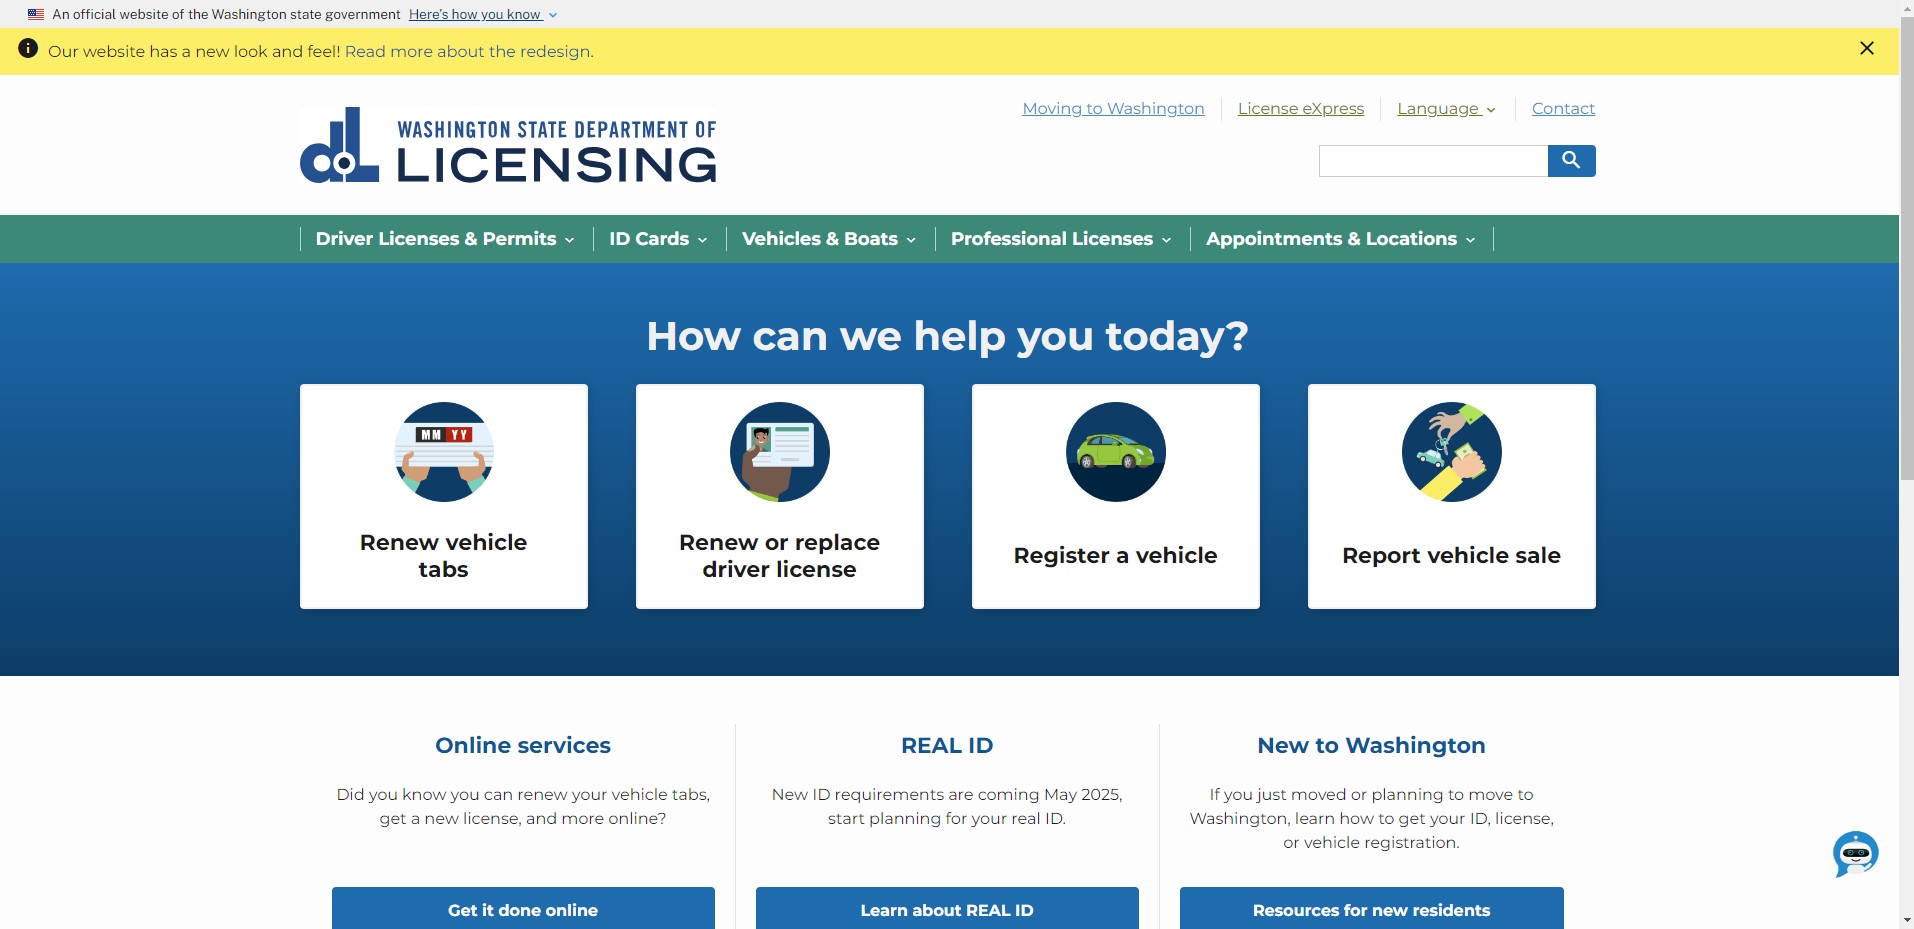 Department of Licensing website has a new look